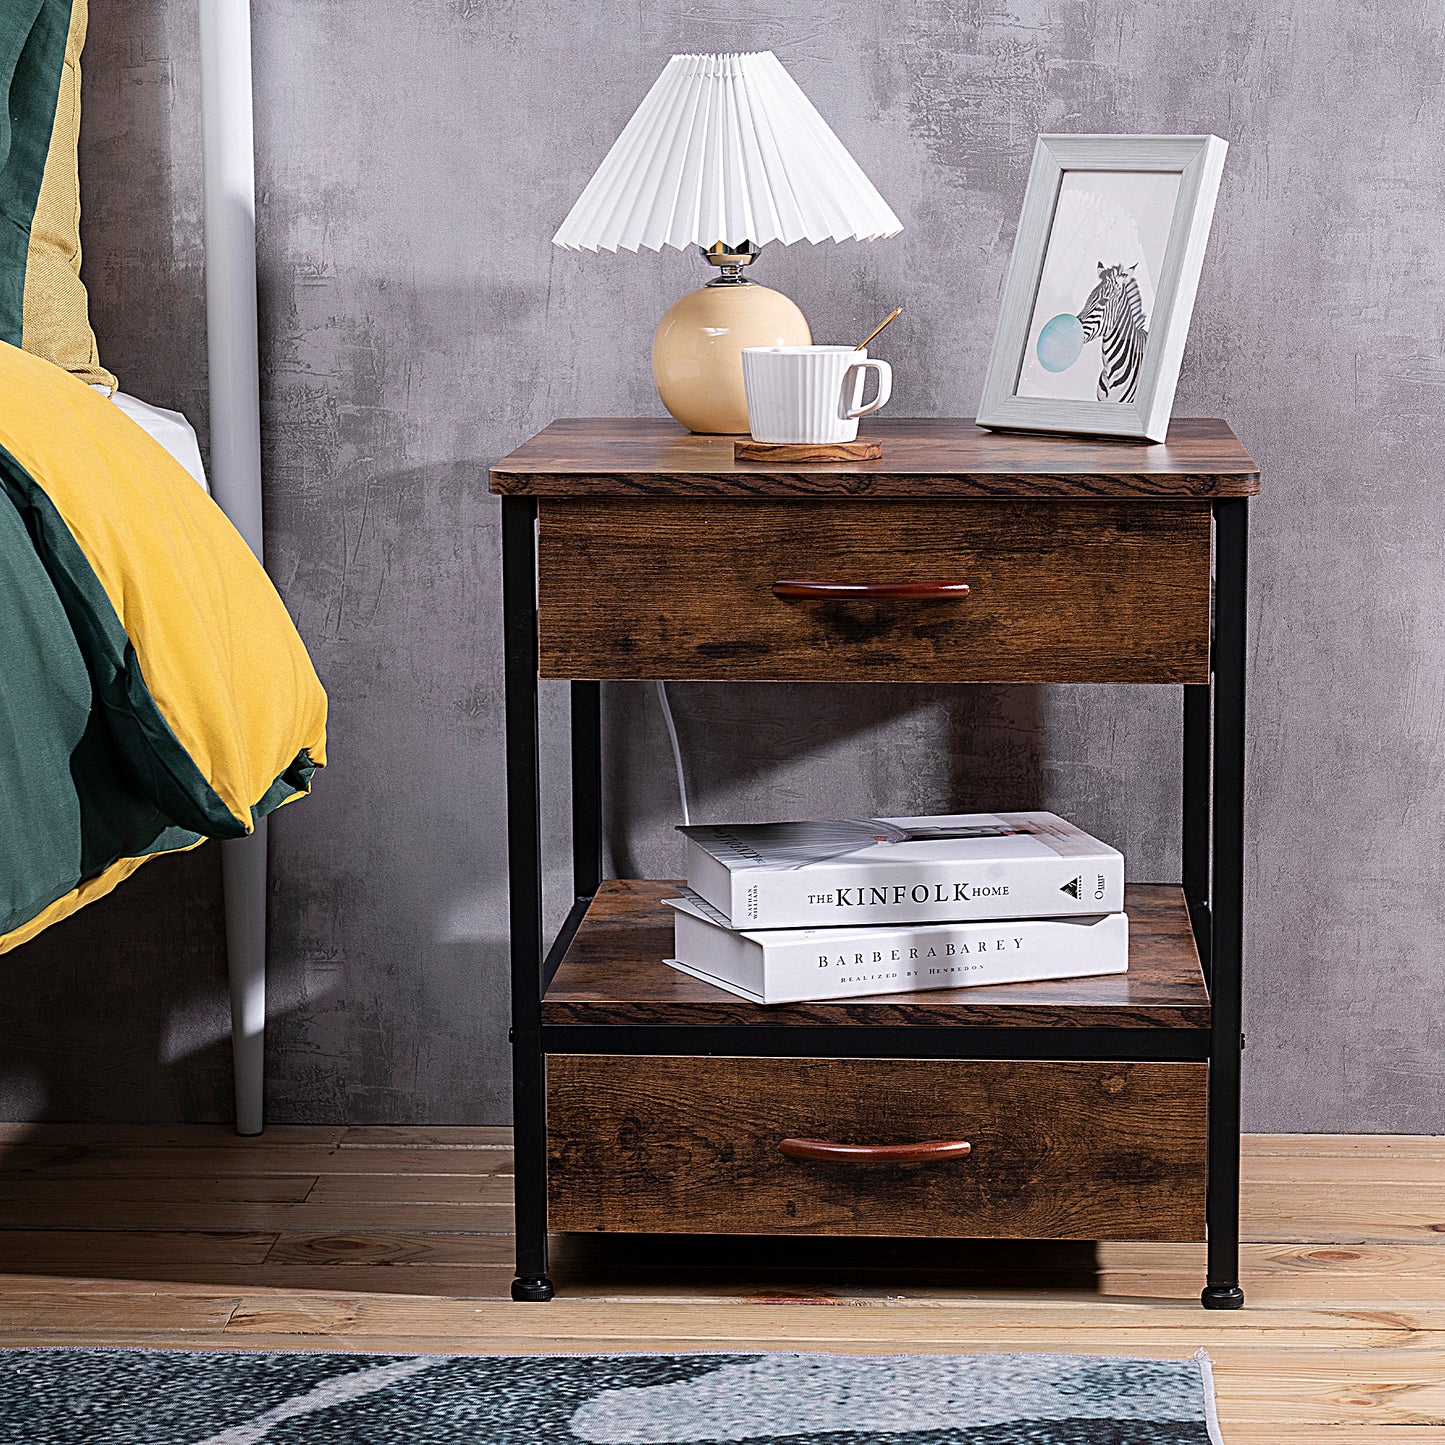 Wooden End Table with 2 Drawers for Study & Living Room